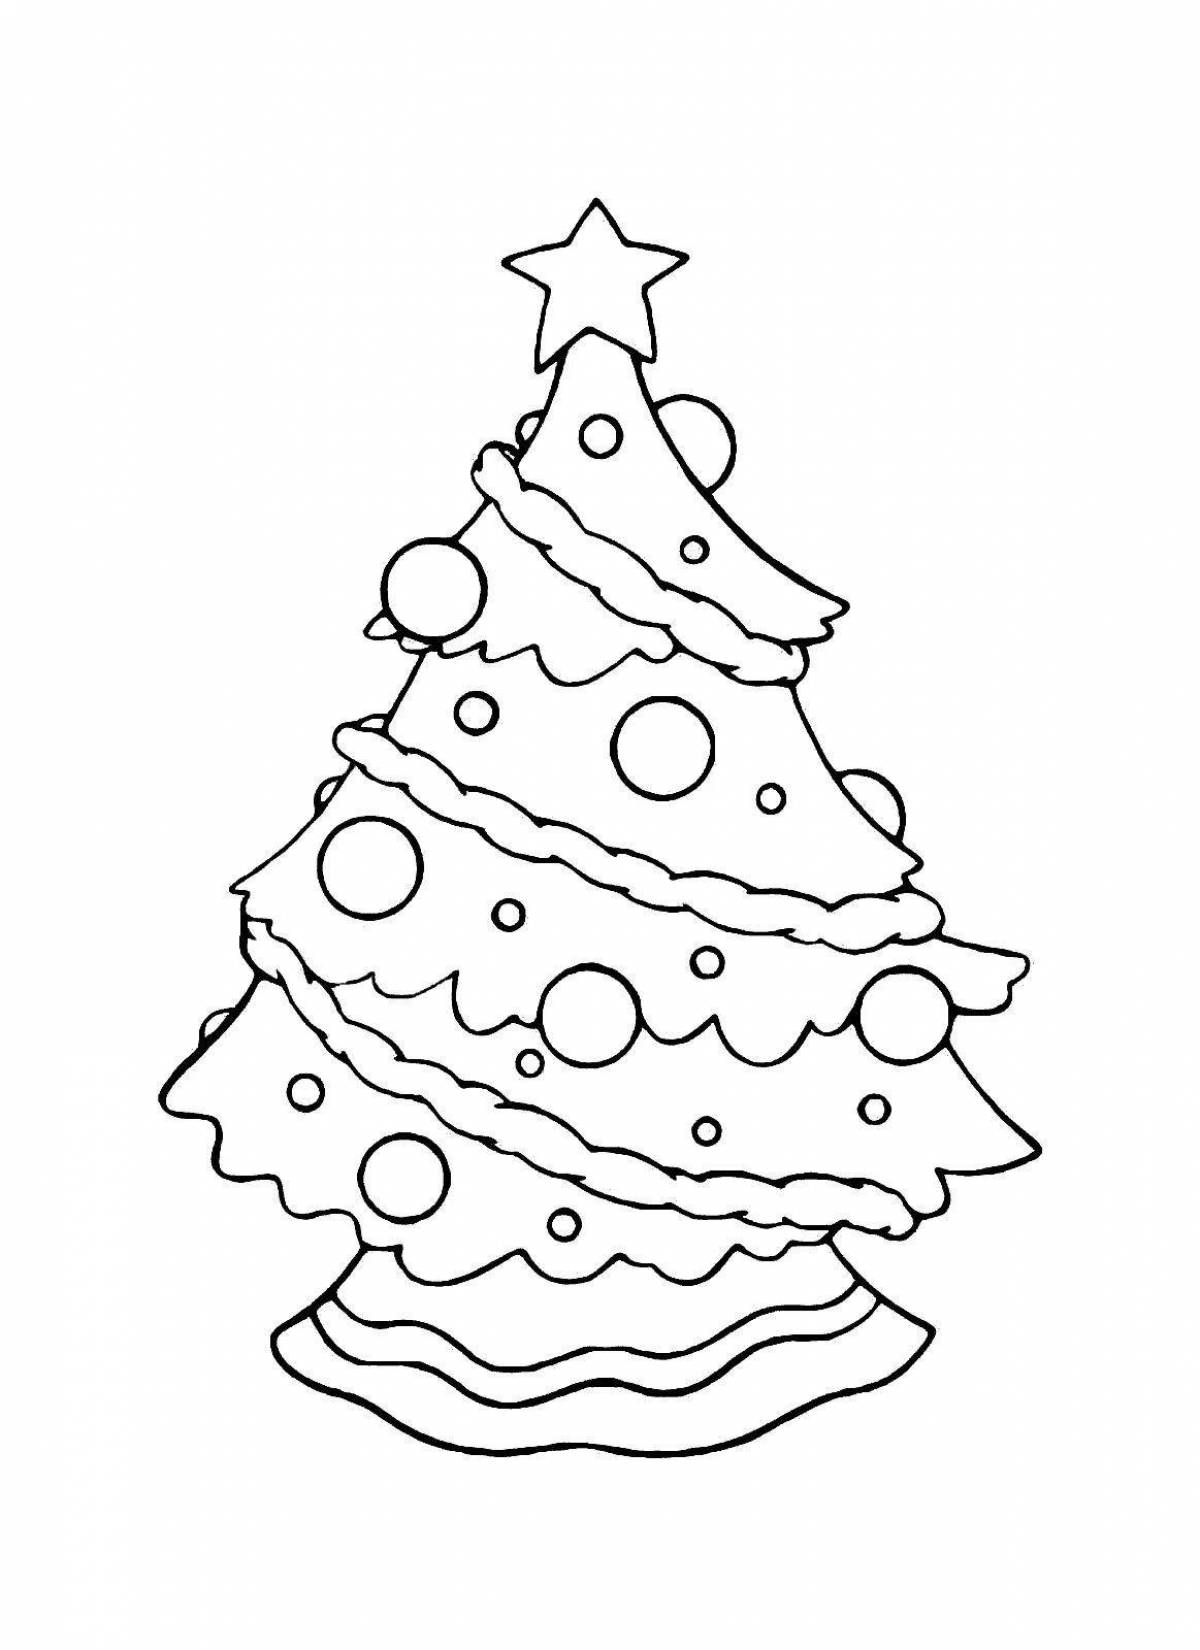 Intricately decorated Christmas tree coloring book